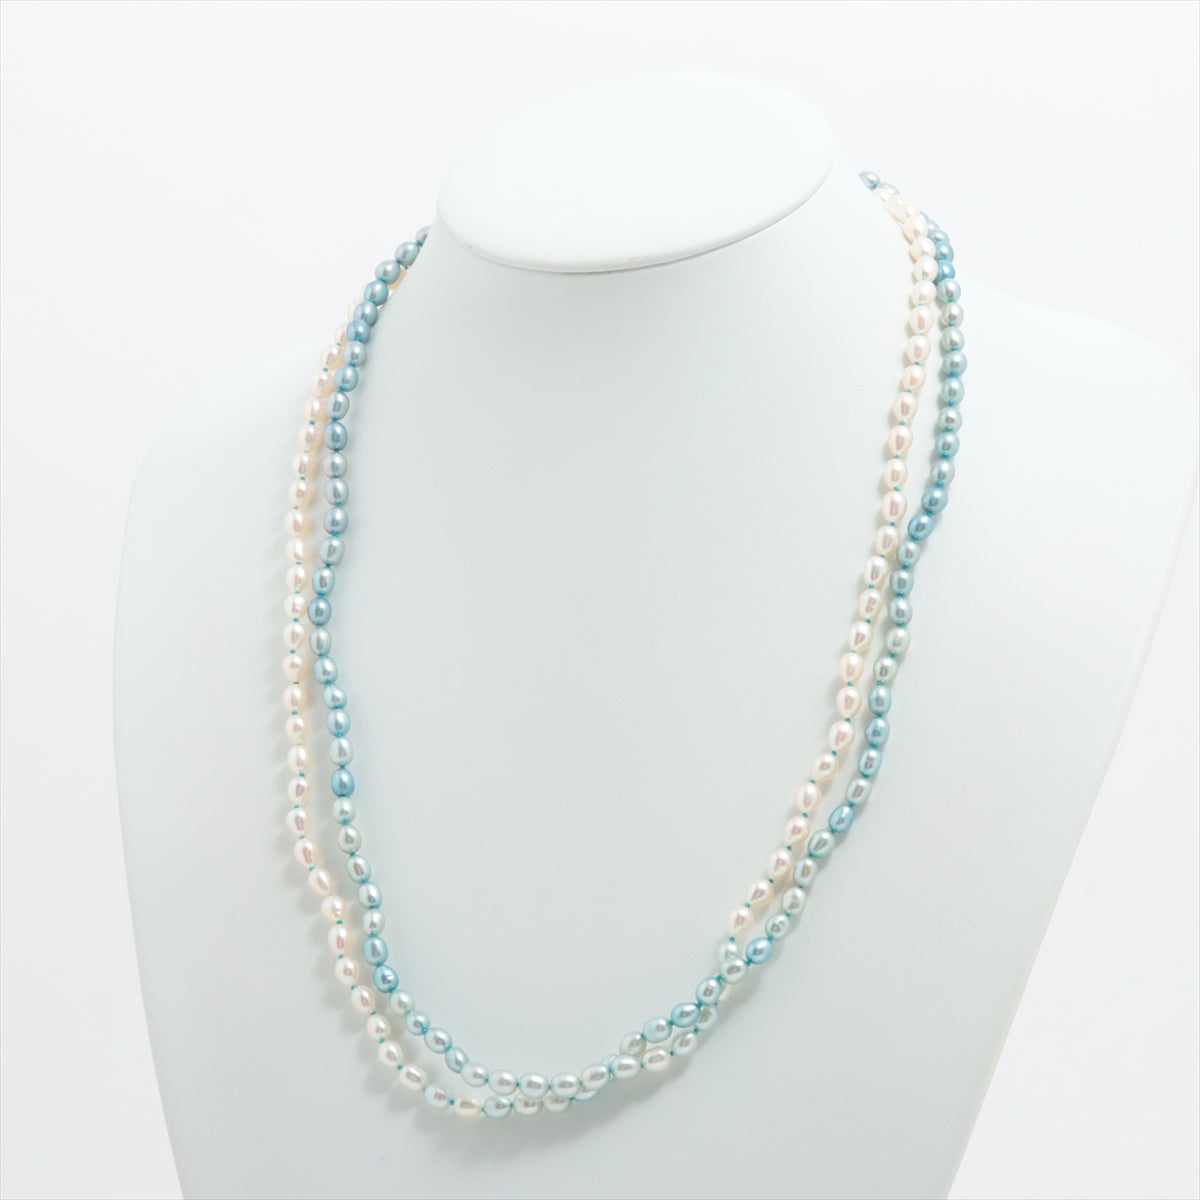 Agat Pearl necklace K10 (YG) total 43.4g